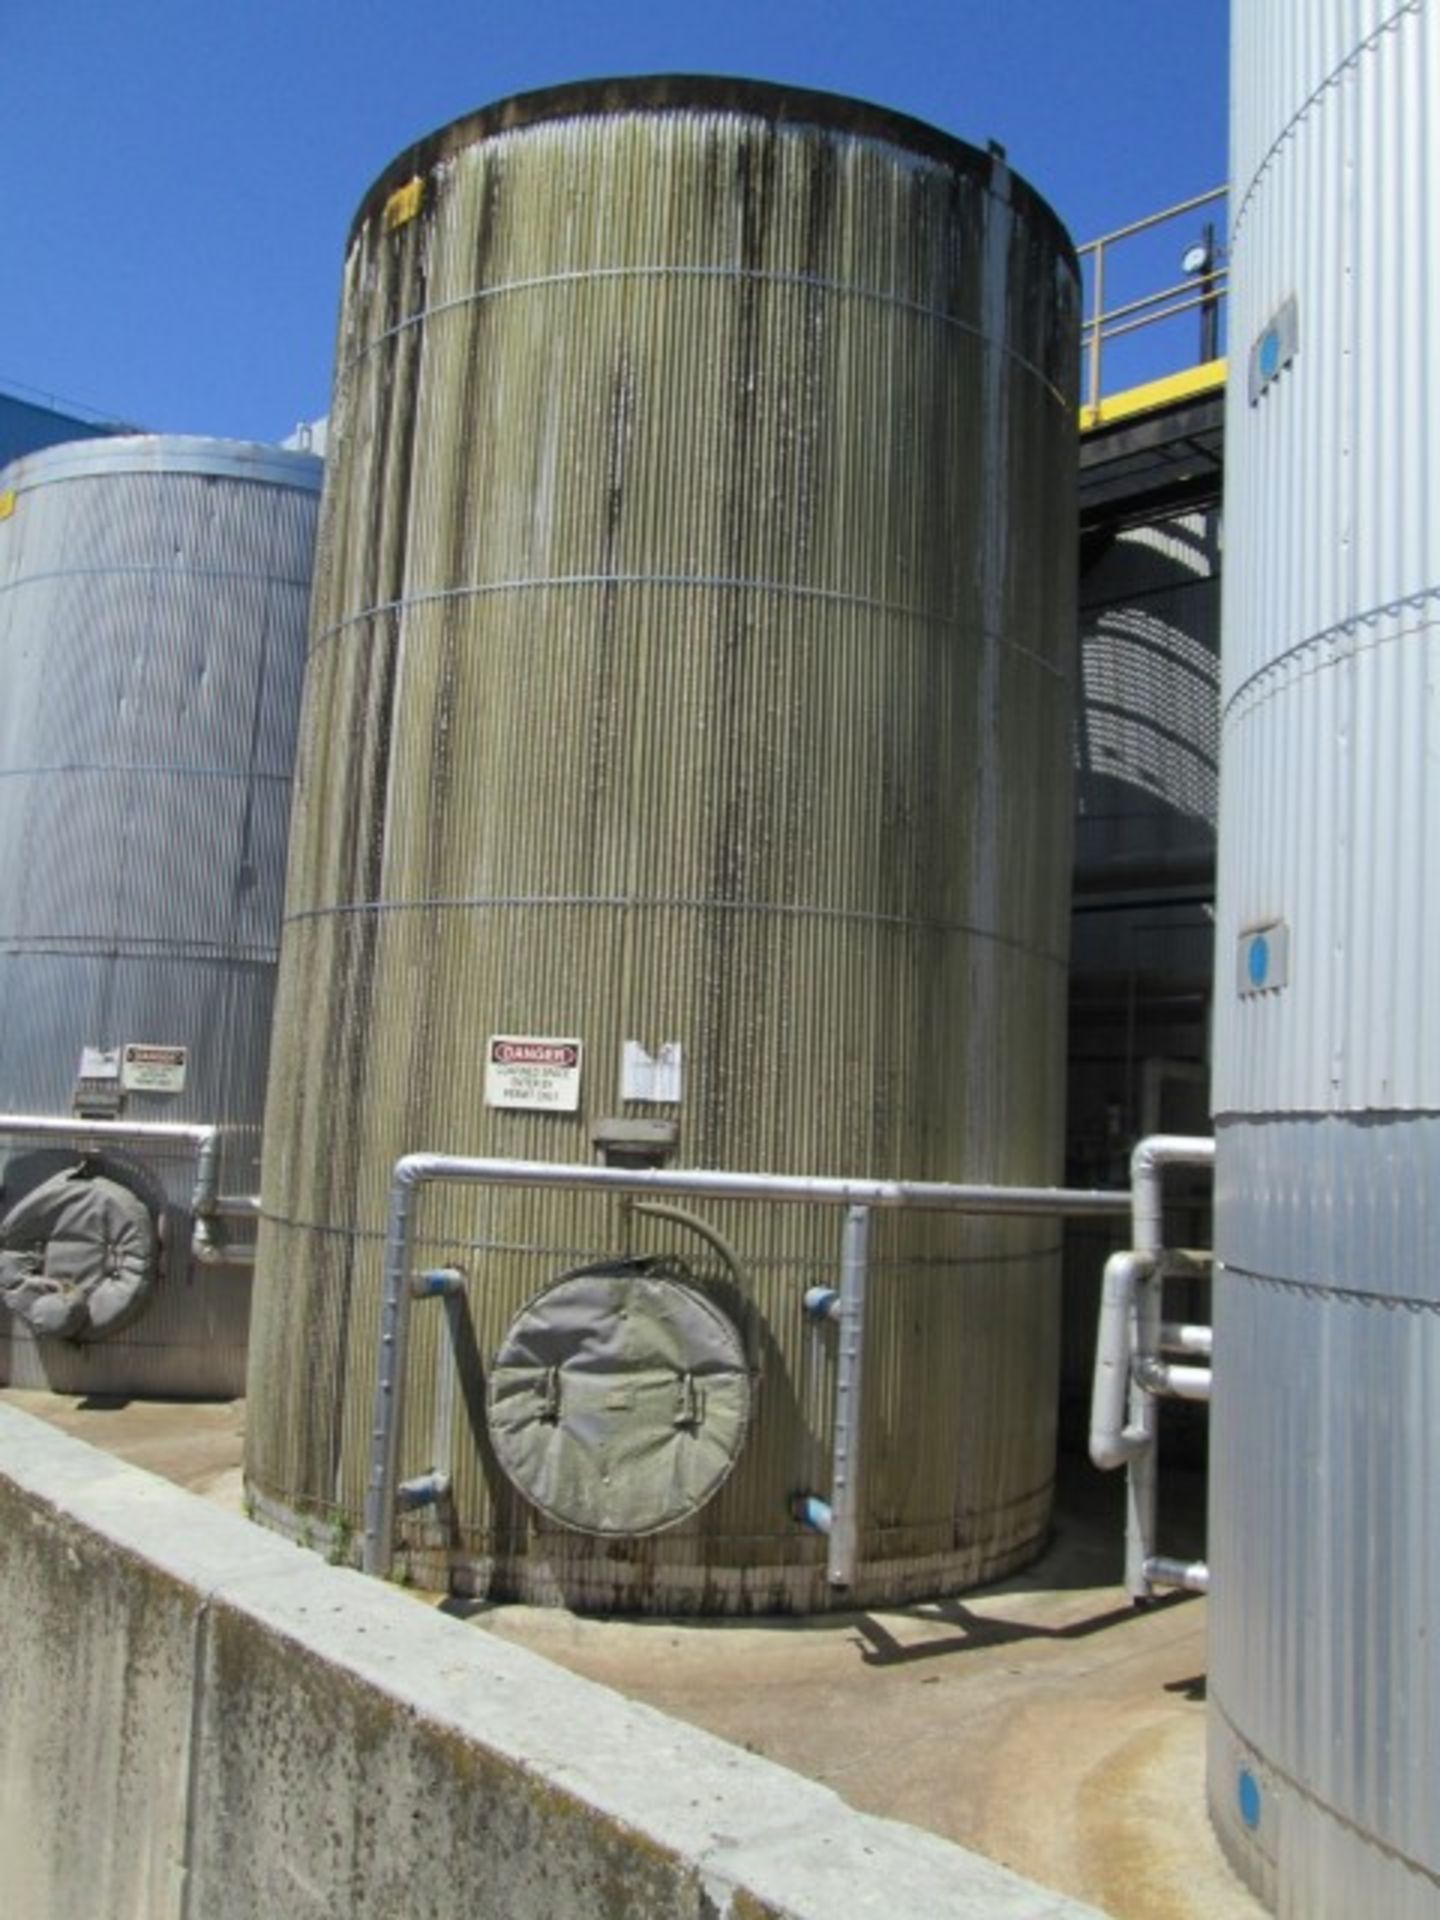 14500 O'Conner storage tank, carbon steel construction, 11'6" diameter x 18'6" straight side, dome